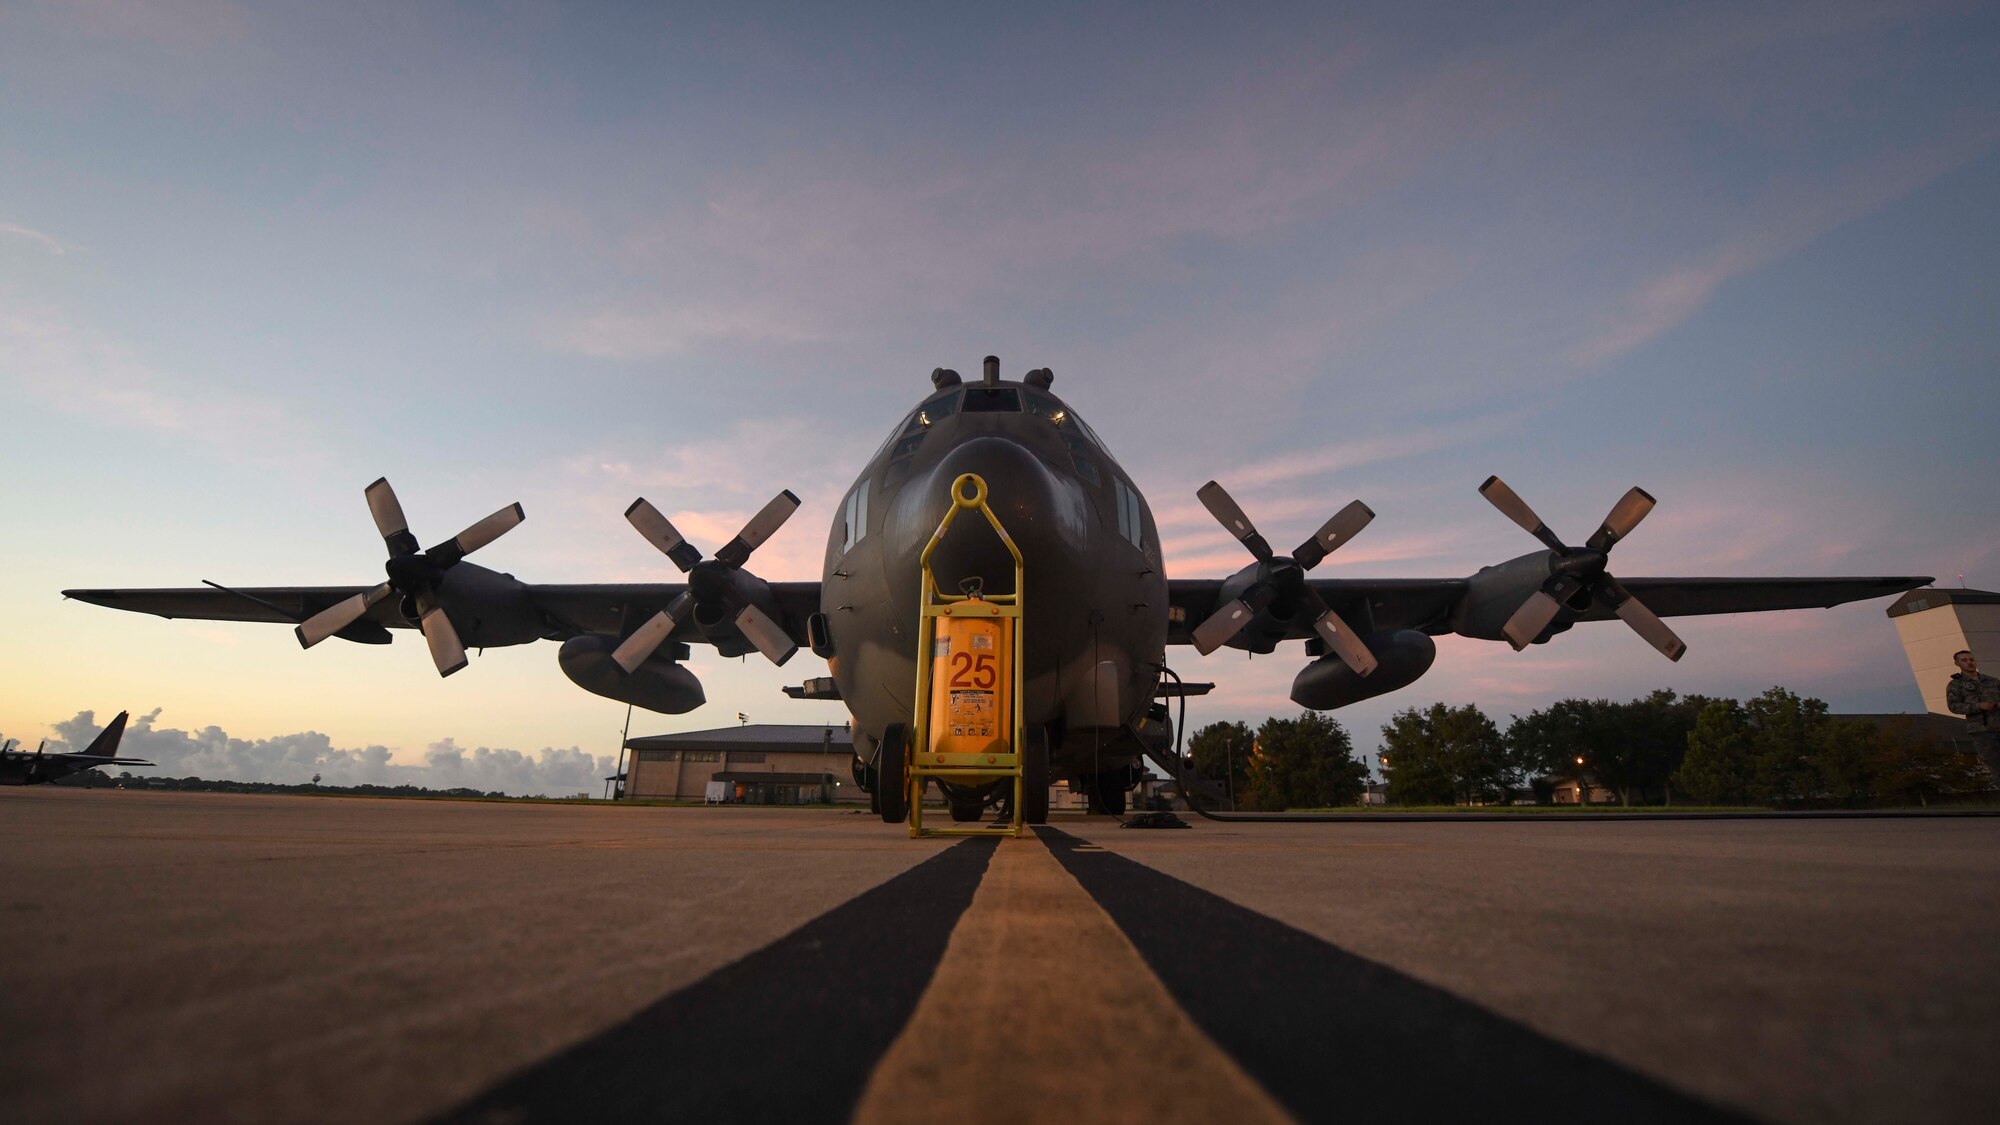 An AC-130U Spooky gunship tail number A0253 retires at Hurlburt Field, Florida, Sept. 11, 2018. Spooky A0253 was retired to the 309th Aerospace Maintenance and Regeneration Group, known as the aircraft boneyard, at Davis-Monthan Air Force Base, Arizona, after 23 years of service. (U.S. Air Force photo by Airman 1st Class Dennis Spain)